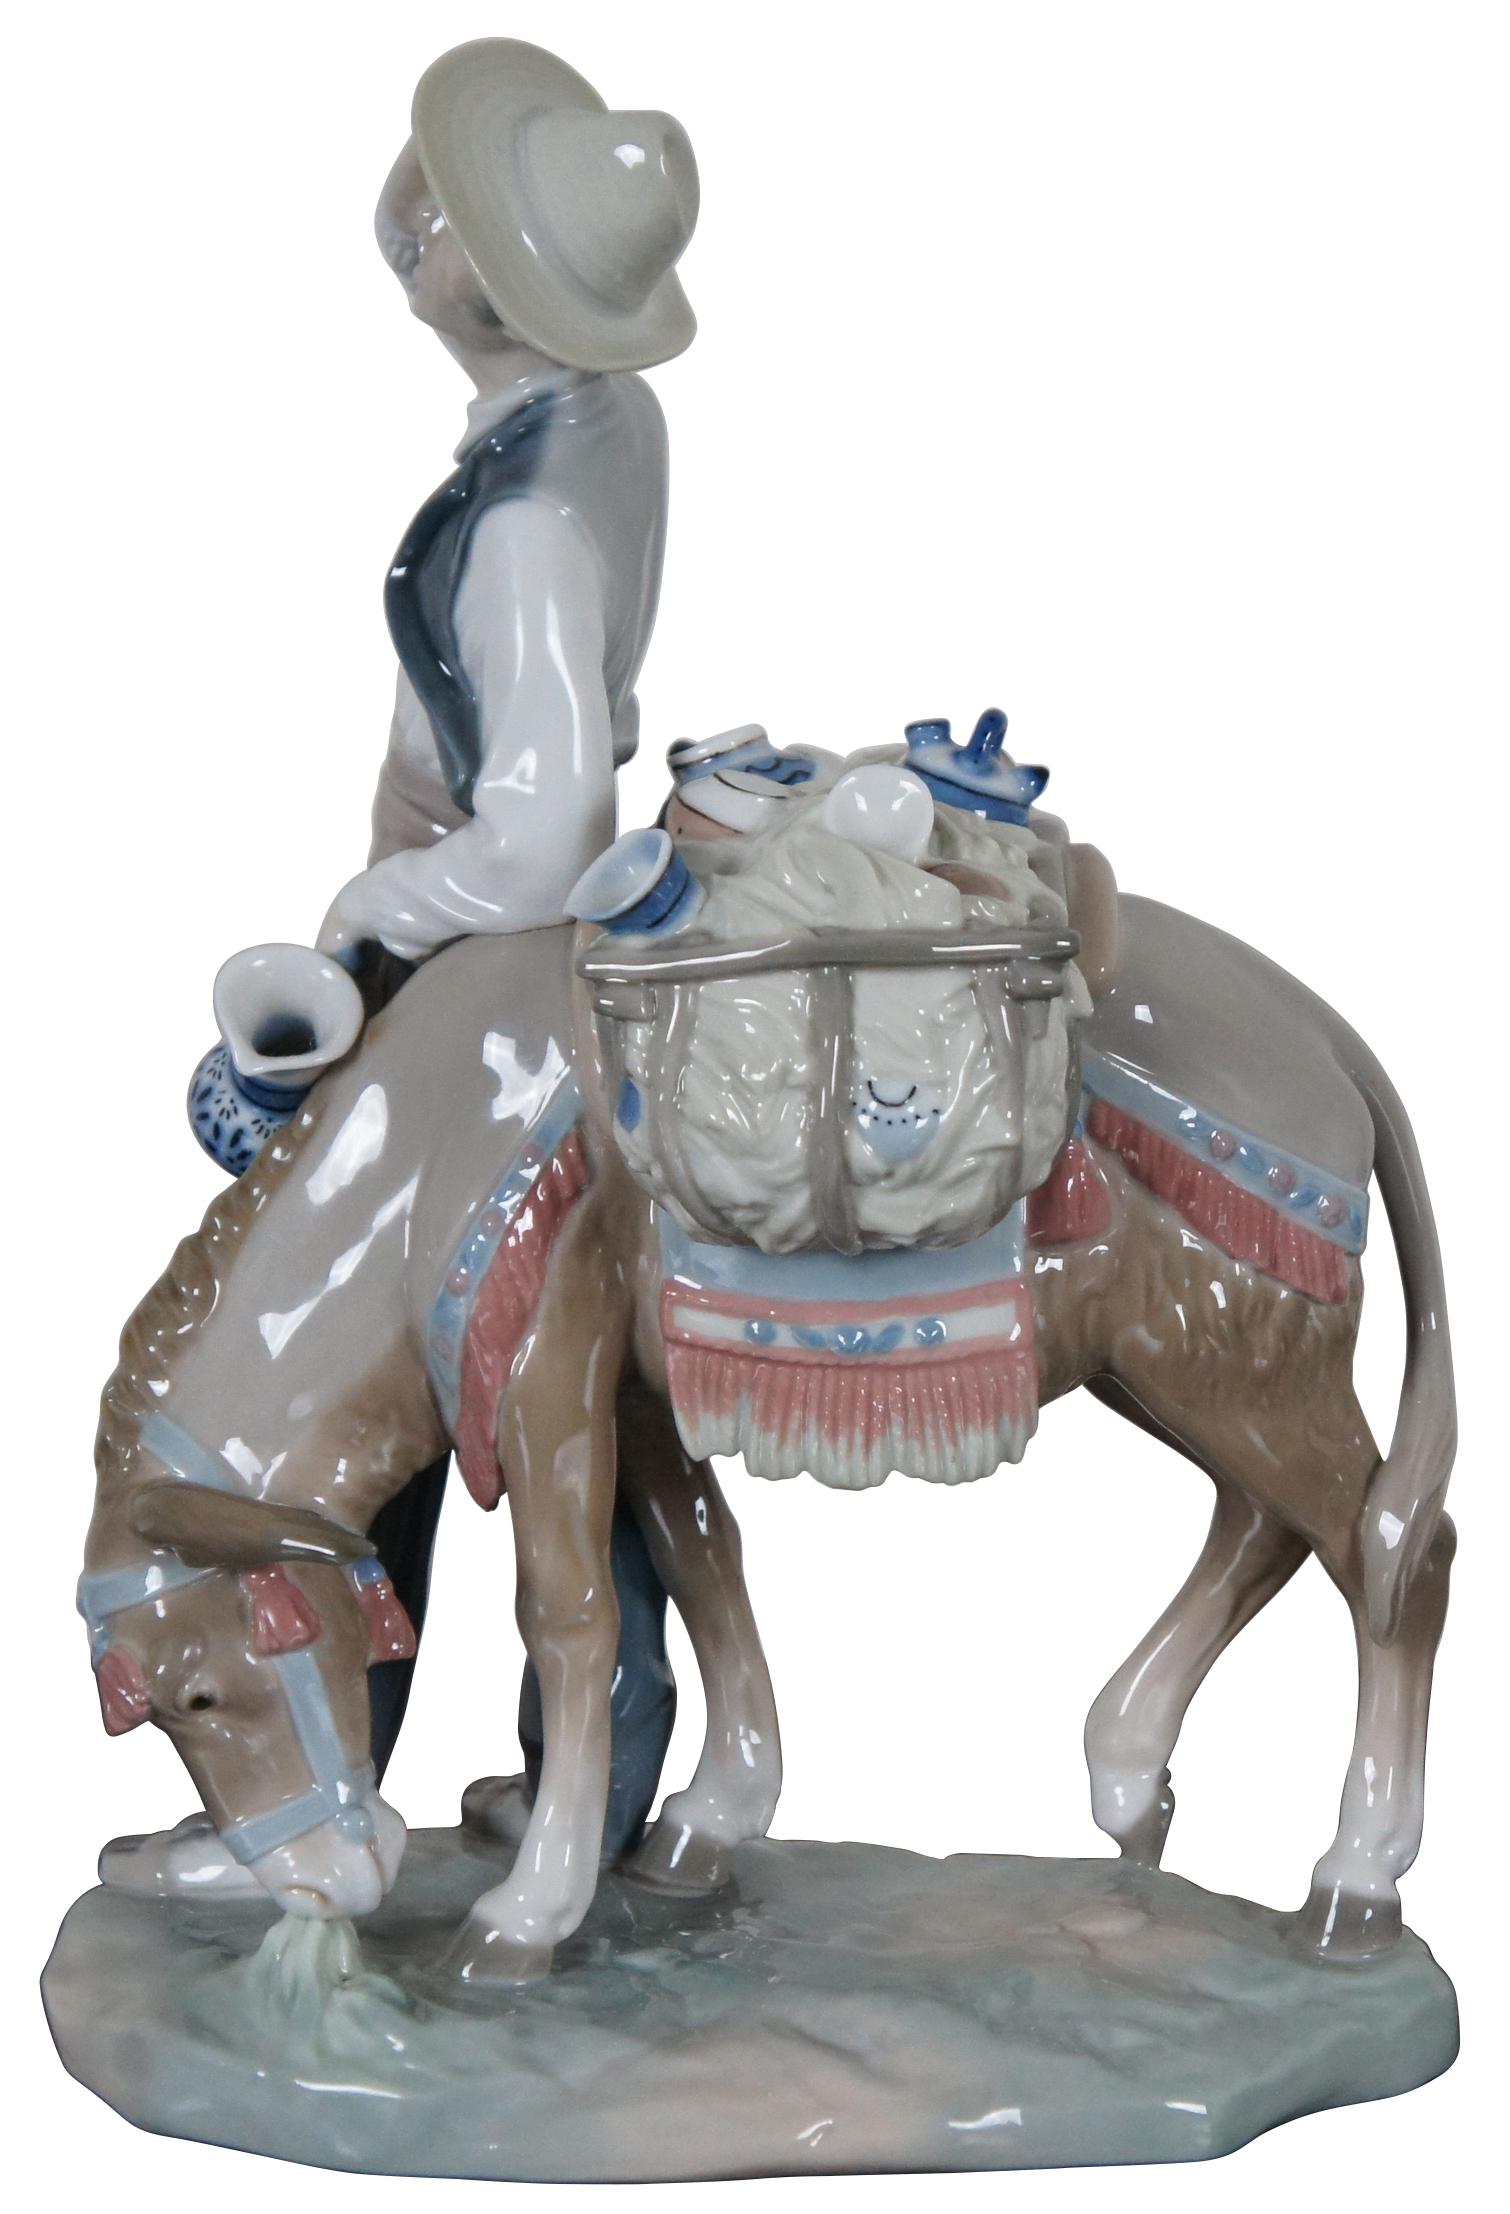 Vintage Lladro Spain porcelain figurine #4859 “Typical Peddler” showing a man leading a donkey laden with a large basket full of crockery. Produced between 1974 and 1985.
 